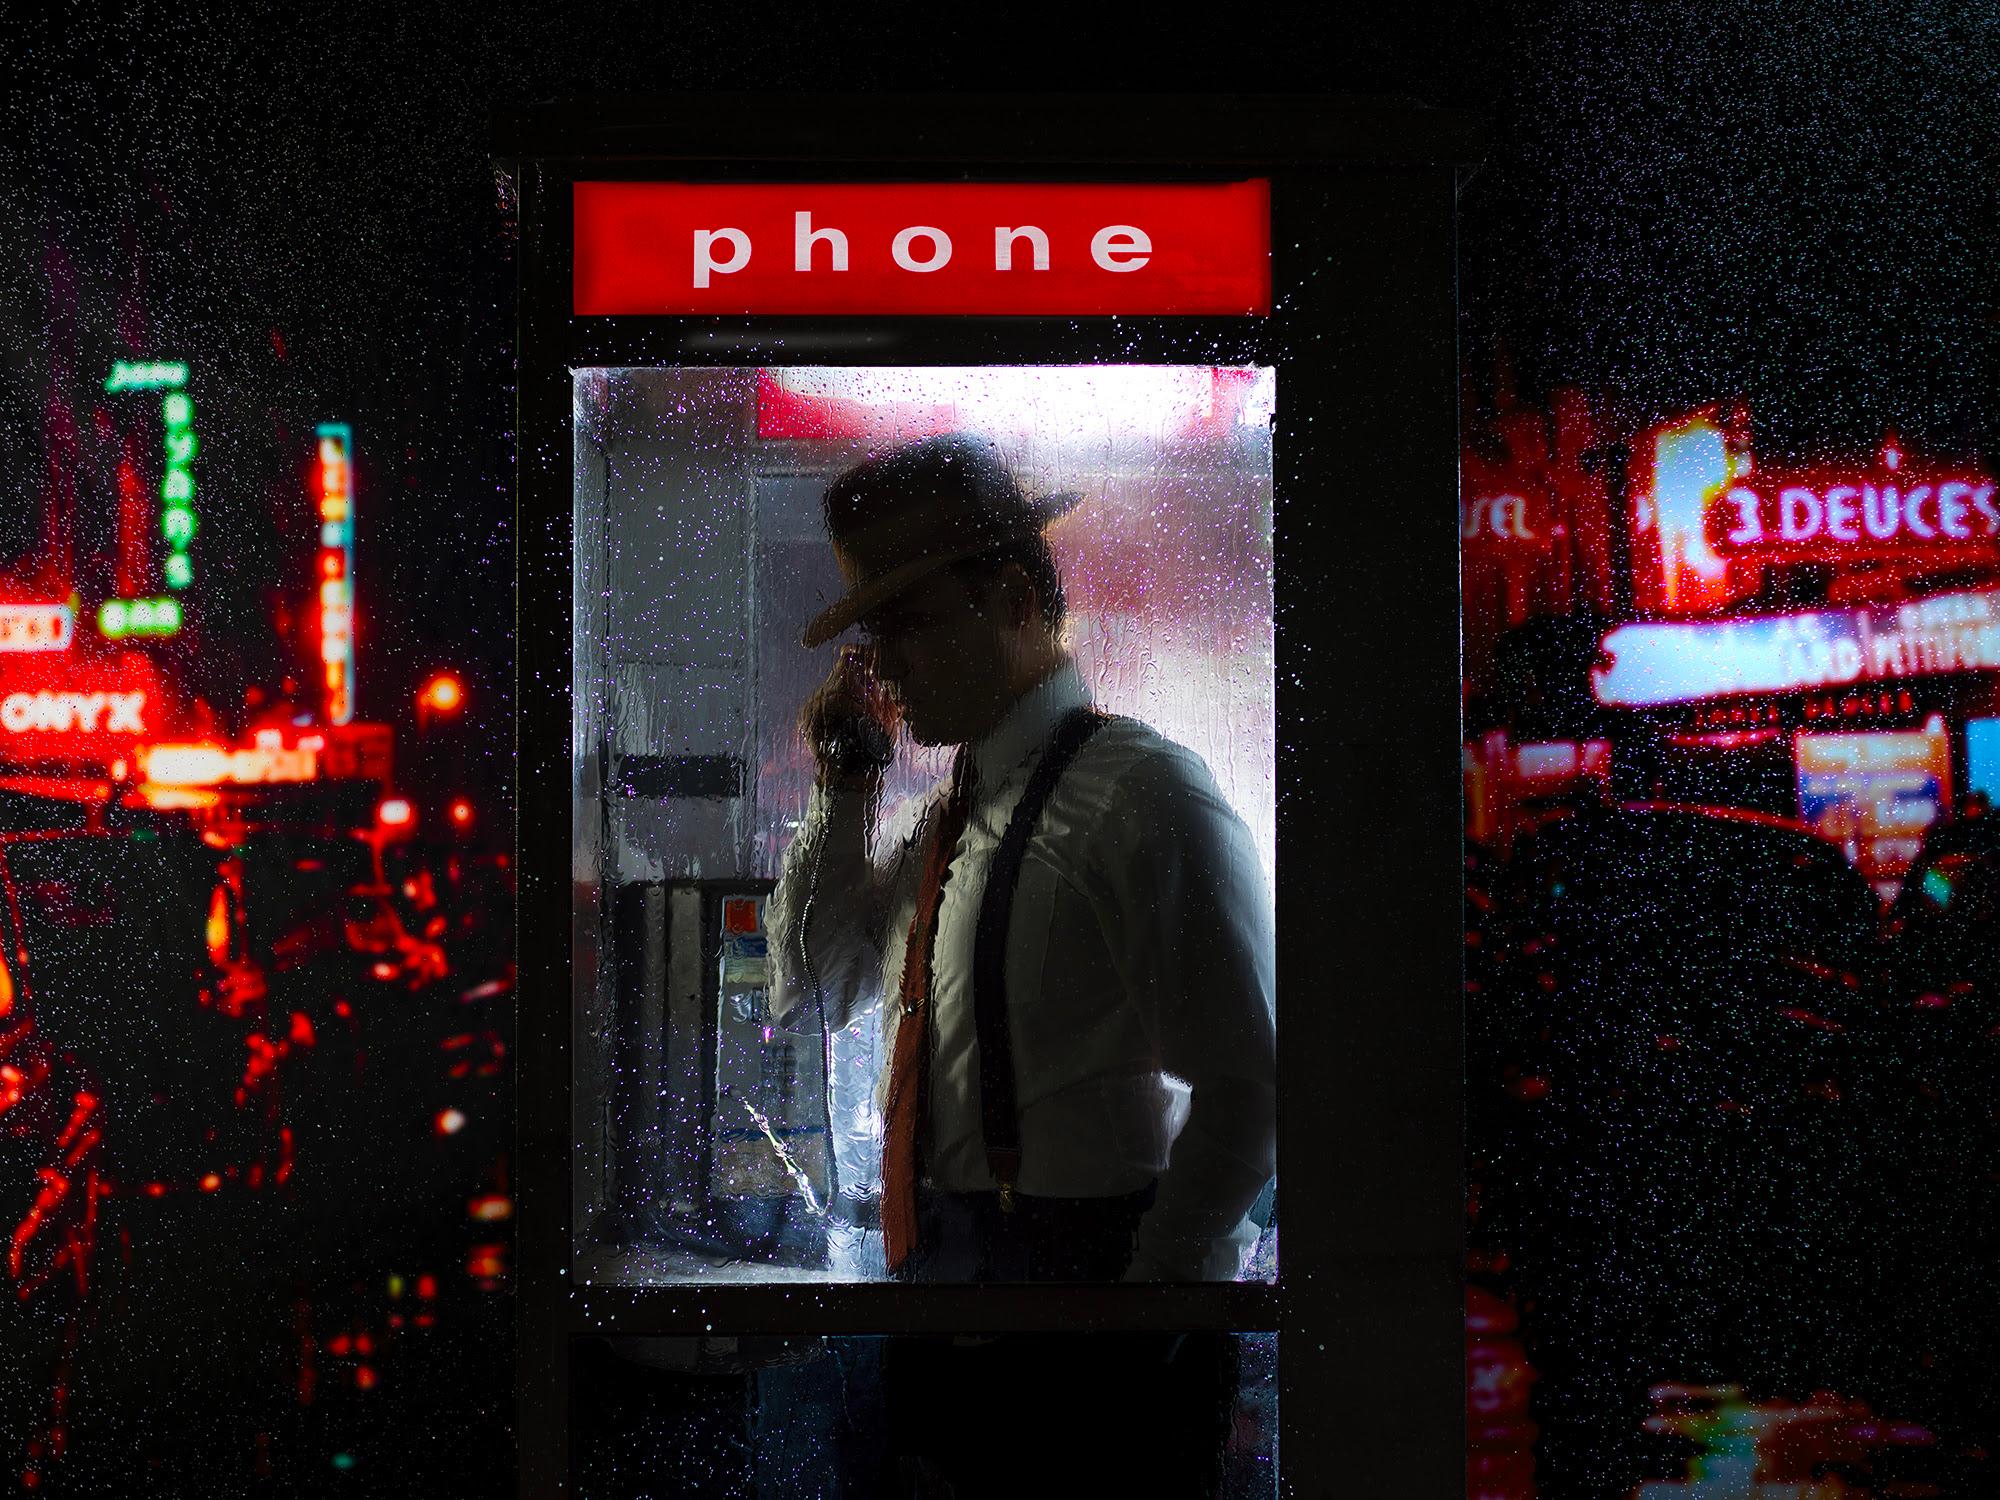 Tyler Shields Black and White Photograph - The Man in the Phone Booth (45" x 60")